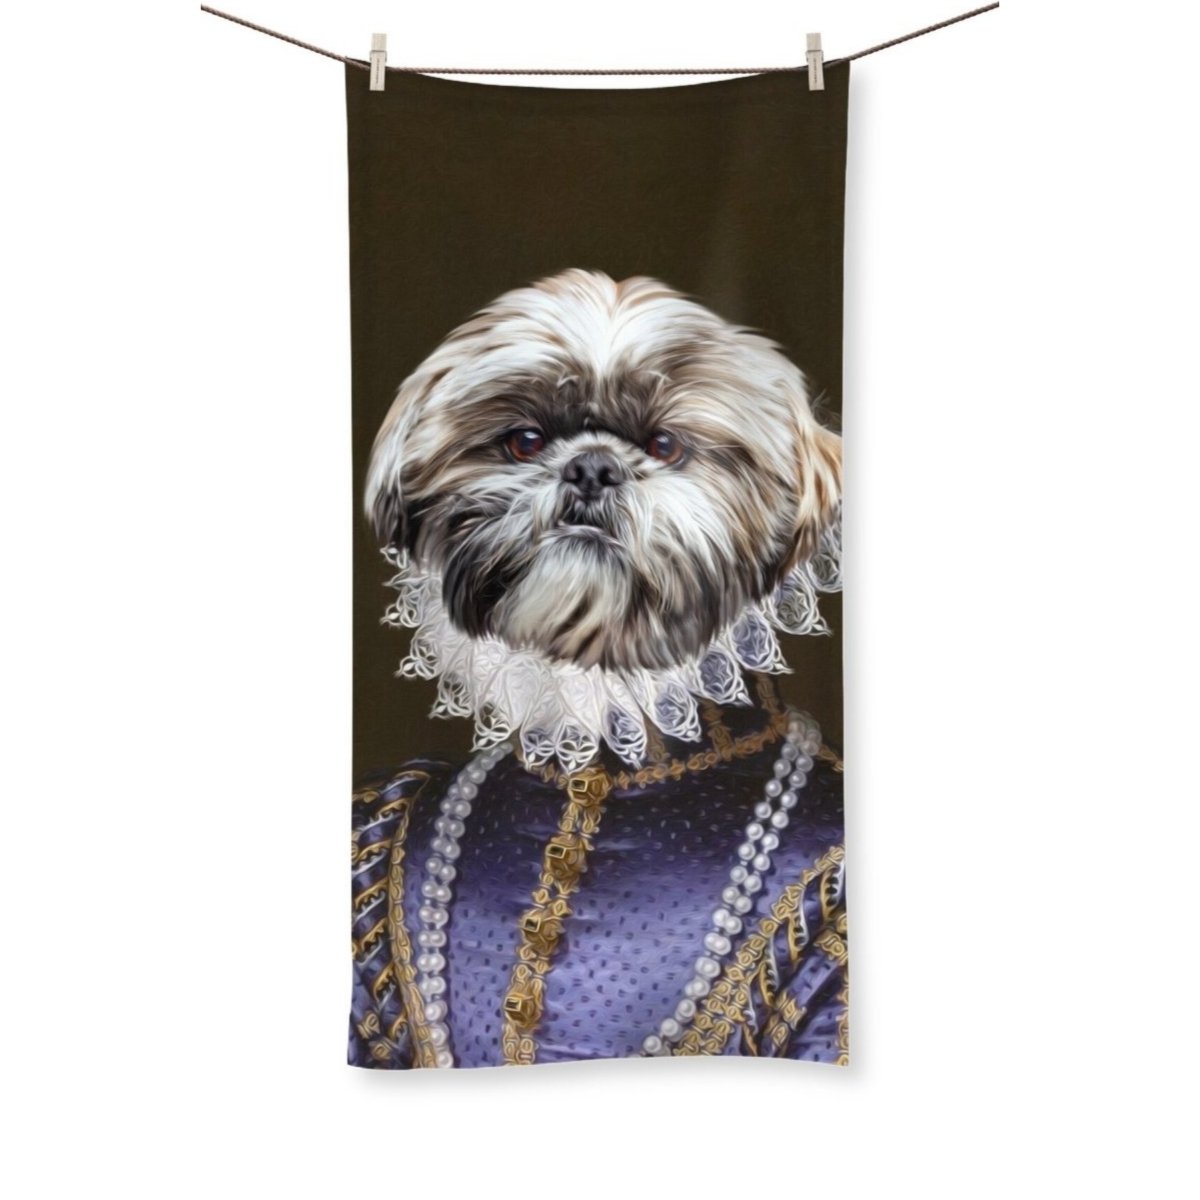 The Grand Duchess: Custom Pet Towel - Paw & Glory - #pet portraits# - #dog portraits# - #pet portraits uk#Paw & Glory, pawandglory, paw portraits, minimal dog art, paintings of pets from photos, painting of your dog, dog portrait images, pet portraits,custom pet portrait Towel